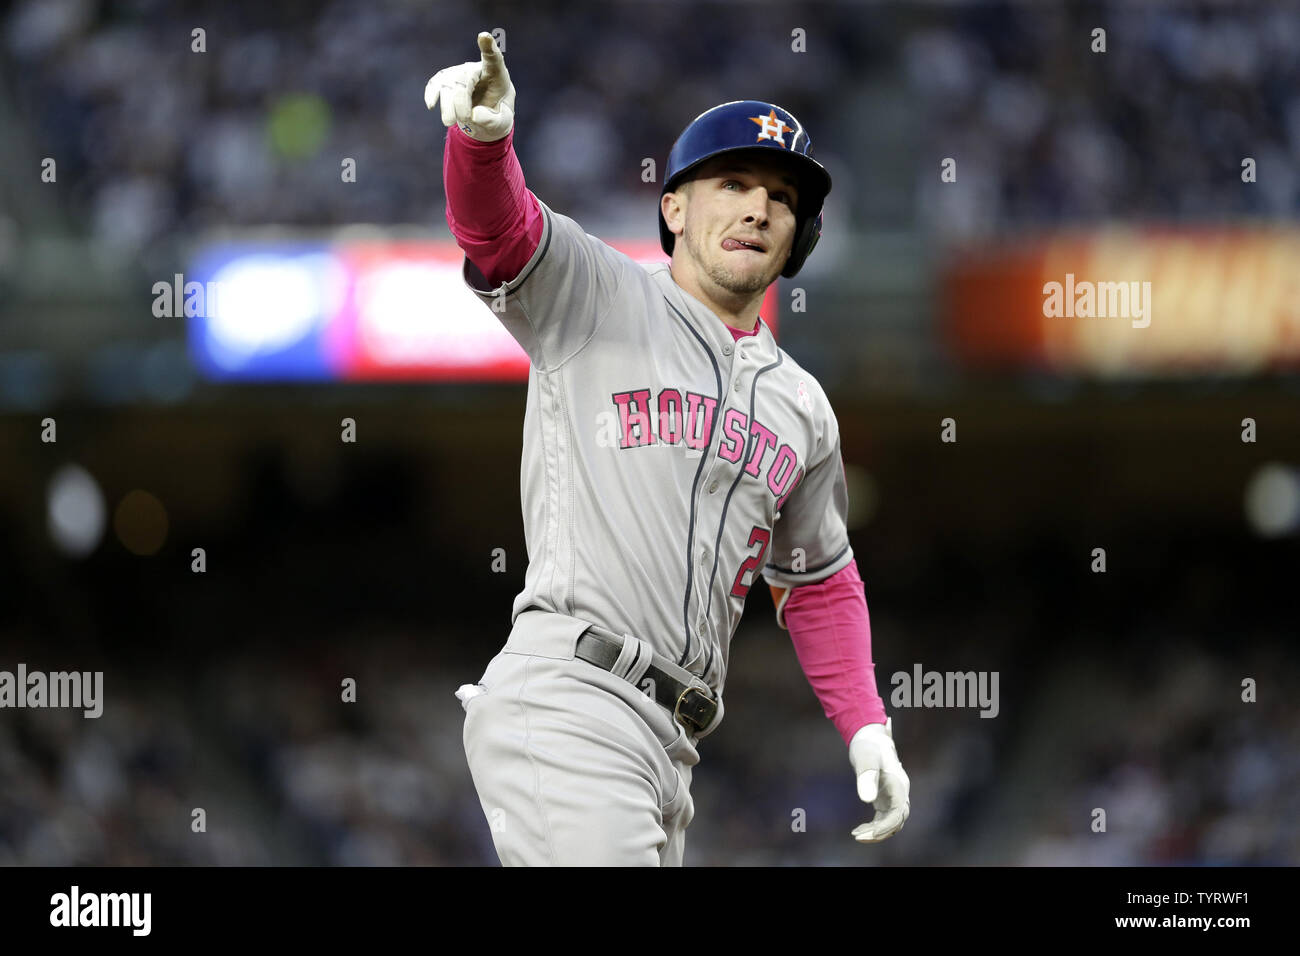 Houston Astros Alex Bregman celebrates after hitting a grand slam in the first inning off of New York Yankees starting pitcher Masahiro Tanaka at Yankee Stadium in New York City on May 14, 2017. The New York Yankees former shortstop Derek Jeter before the game had his No. 2 retired and was also honored with a plaque in Monument Park.     Photo by John Angelillo/UPI Stock Photo